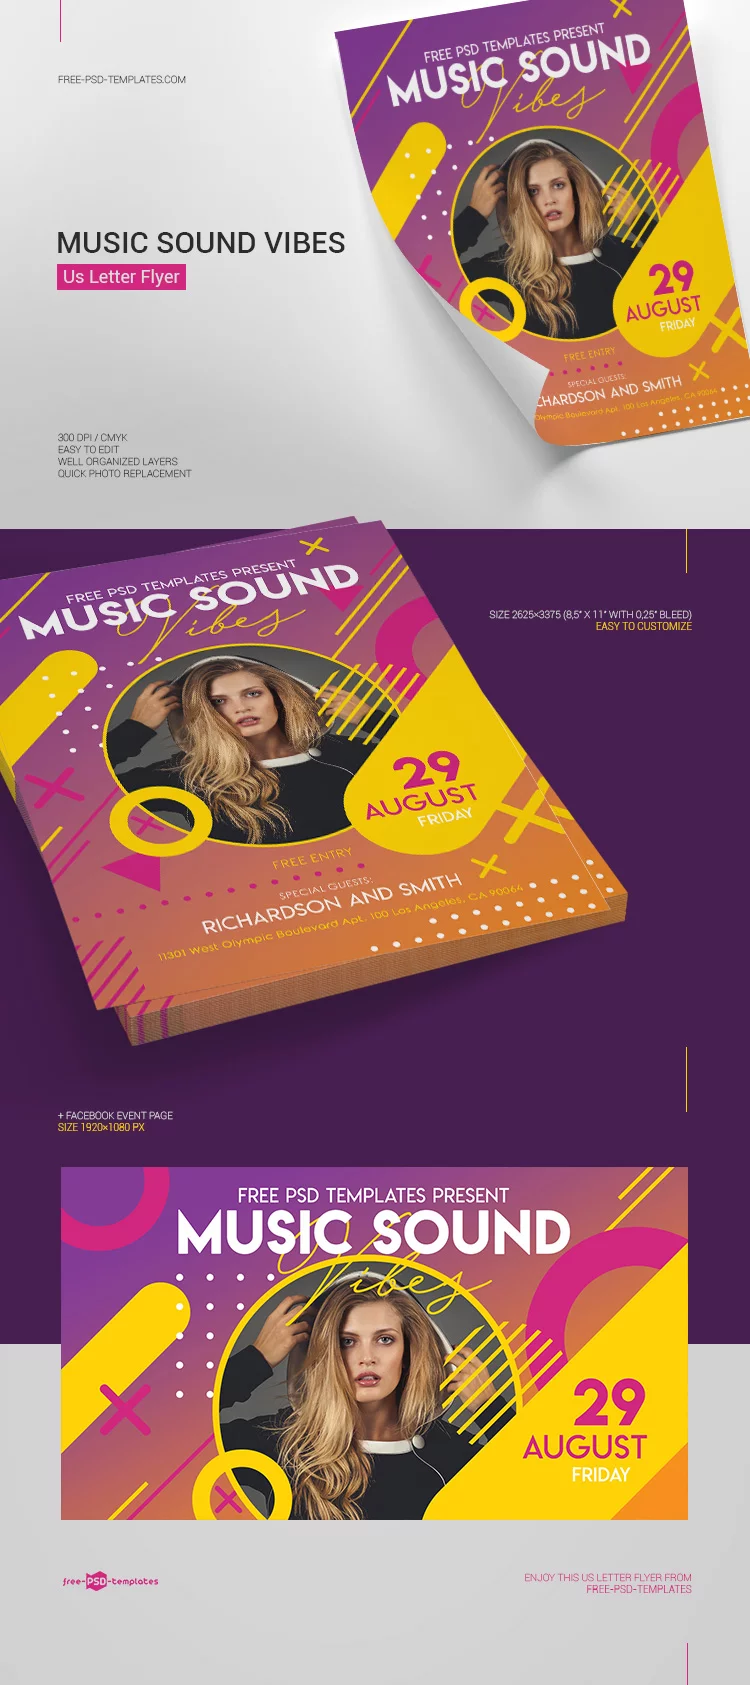 Free Music Sound Vibes Flyer in PSD